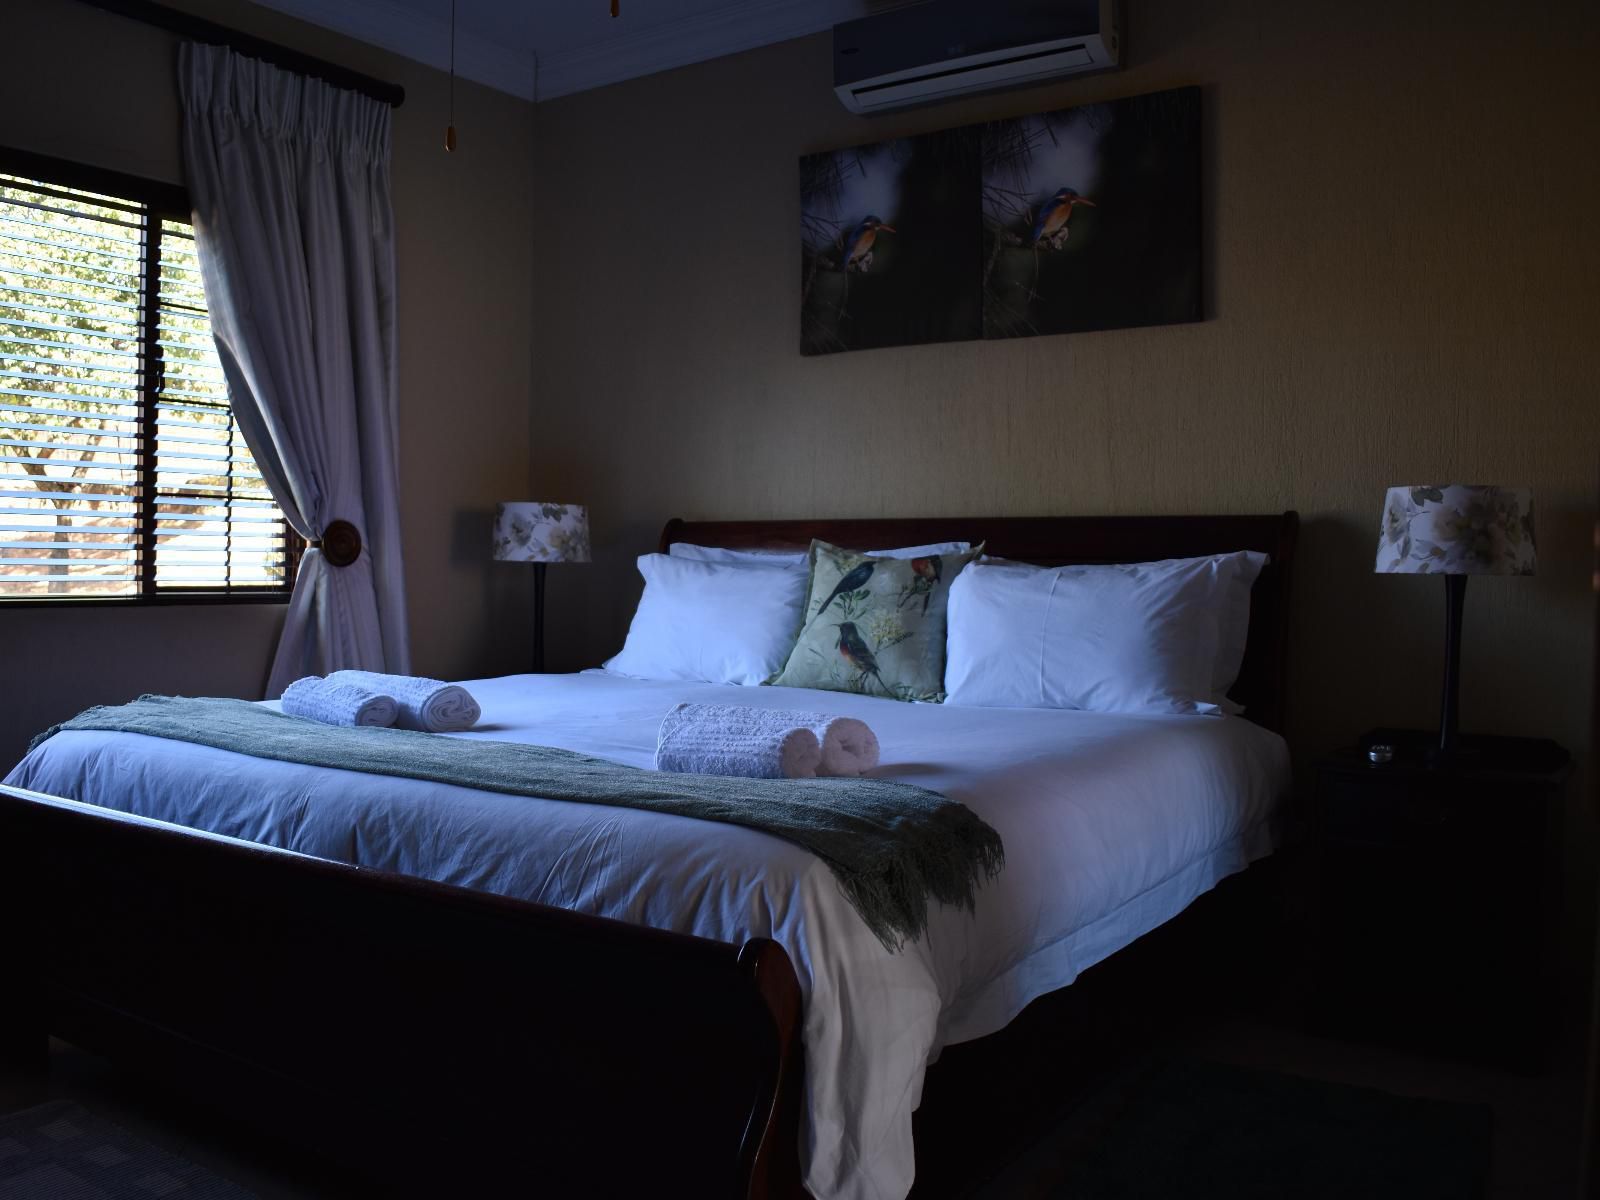 Rovy Villas Luxurious Chalet Nelspruit Mpumalanga South Africa Bedroom